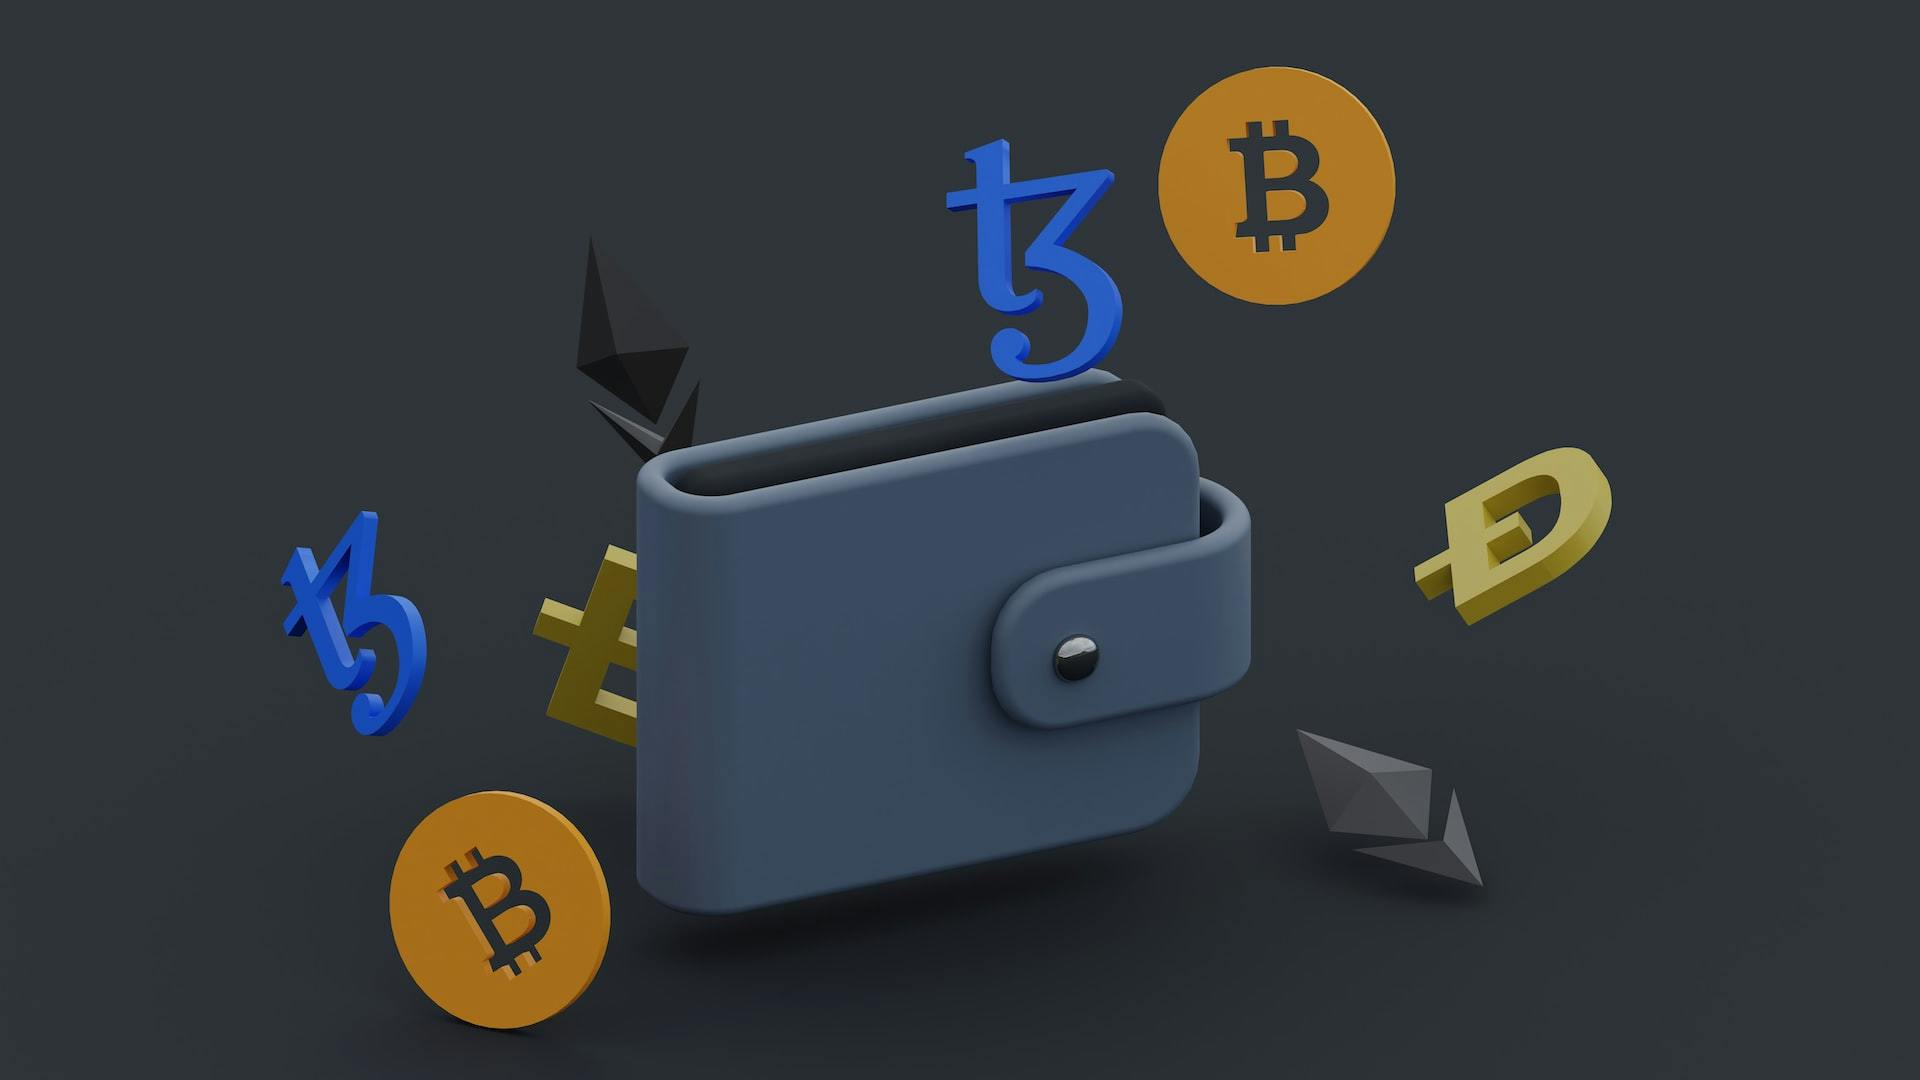 A 3D render of a gray wallet surrounded by the icons associated with various cryptocurrencies